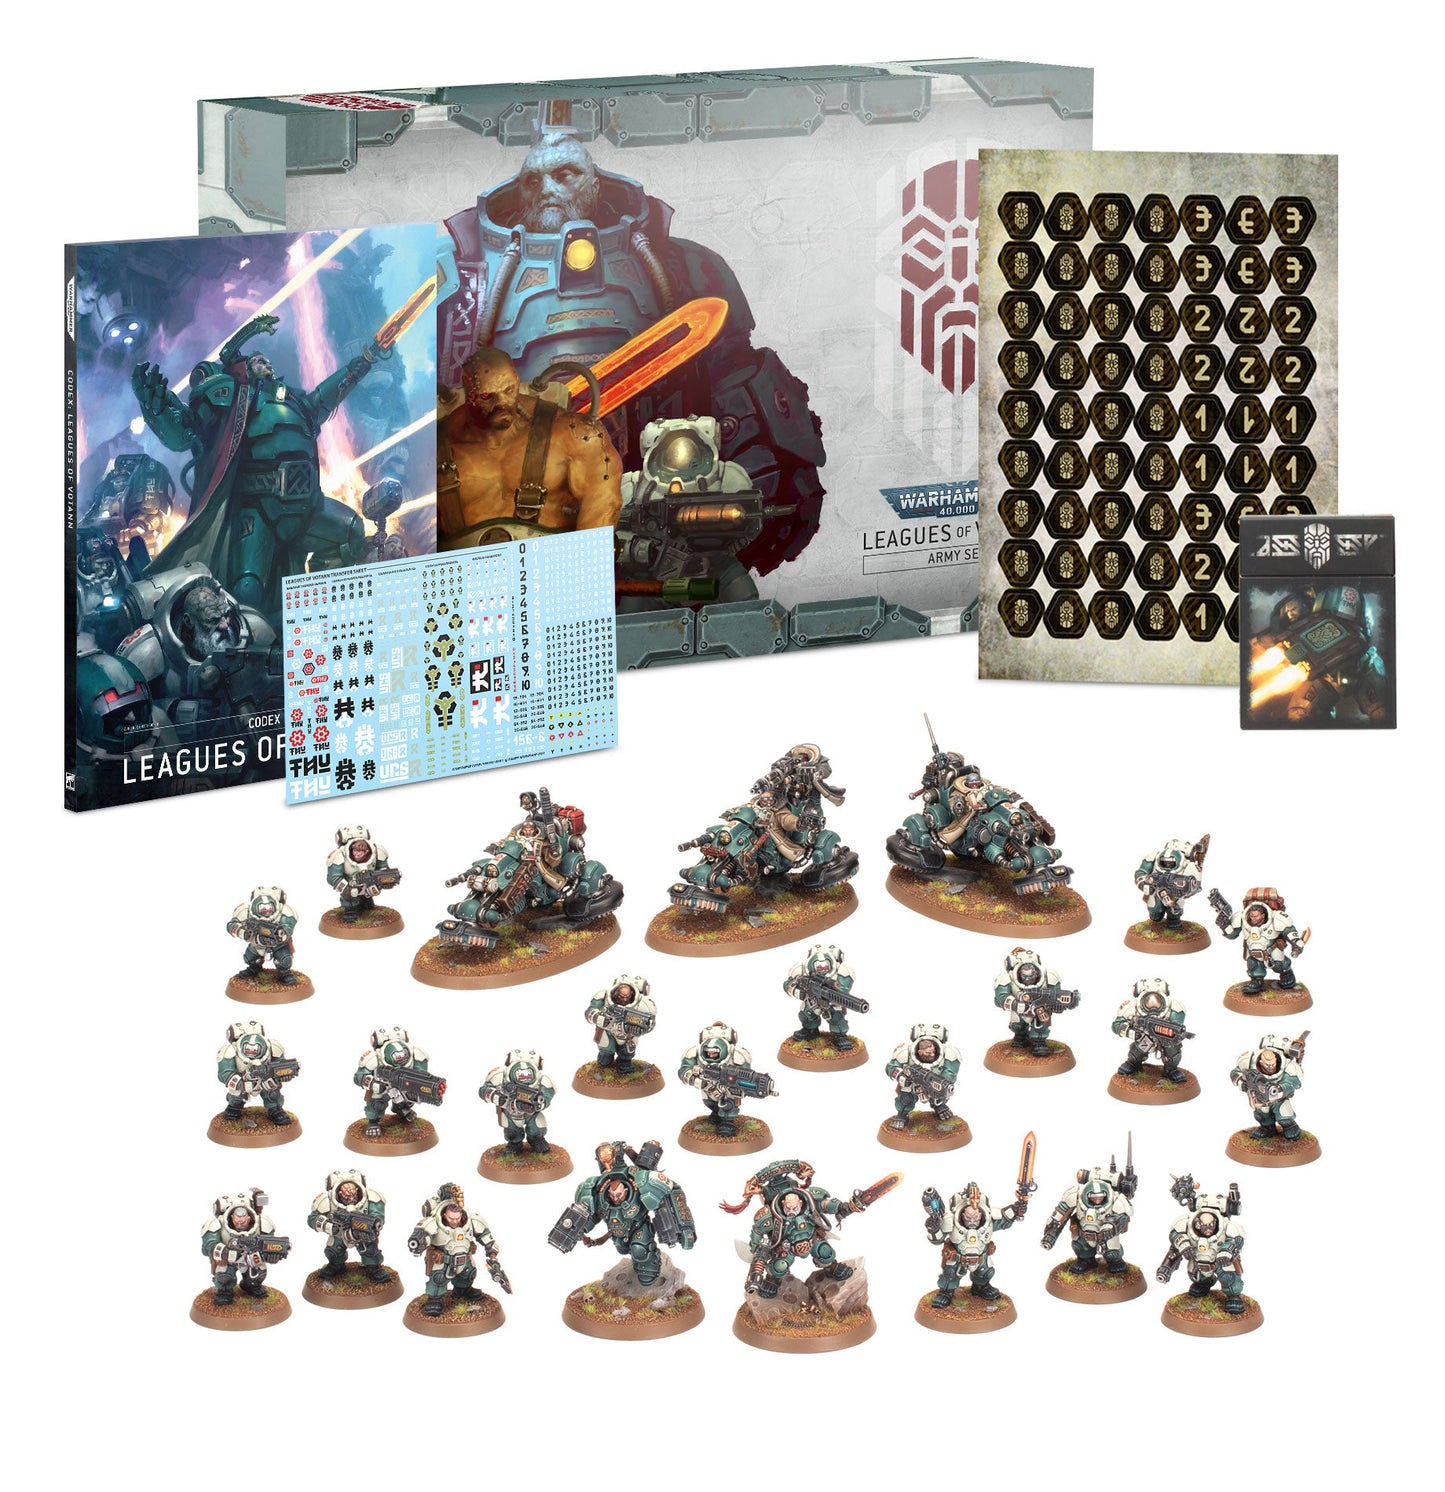 Leagues of Votann Army Set from Games Workshop at The Compleat Strategist